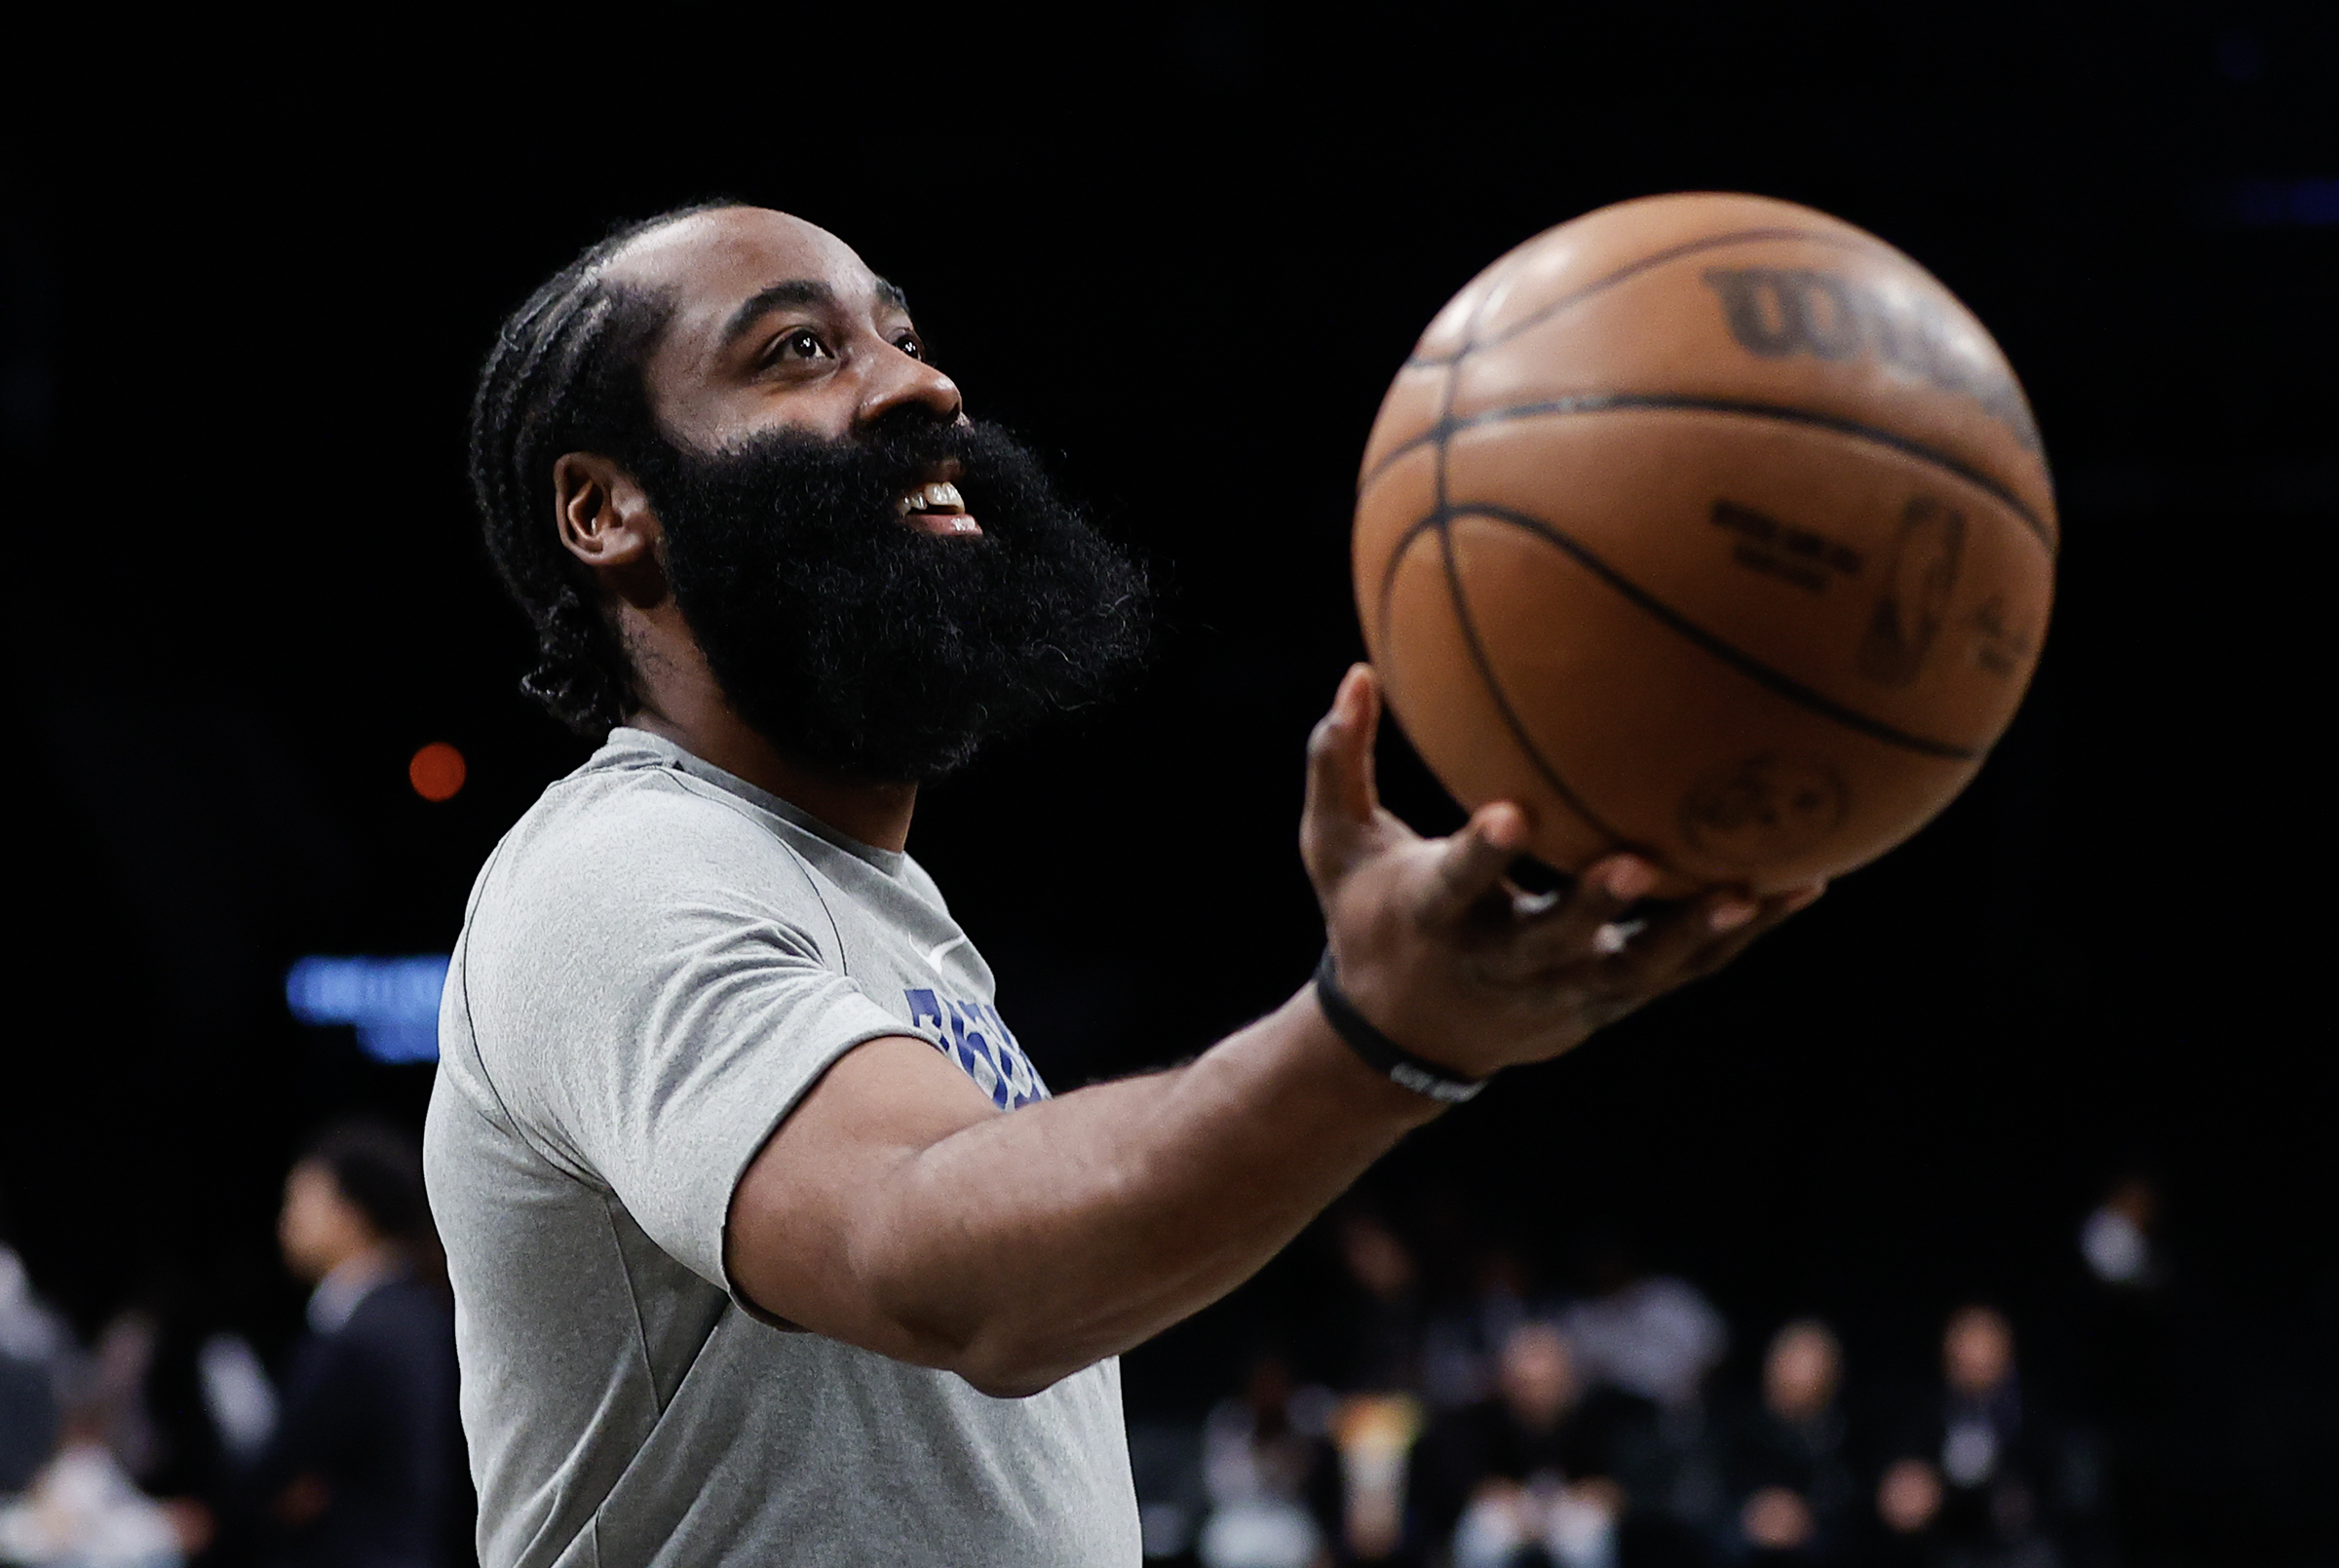 WATCH: Stephen A. Smith loses his mind over Sixers star James Harden's  pregame fit vs Raptors